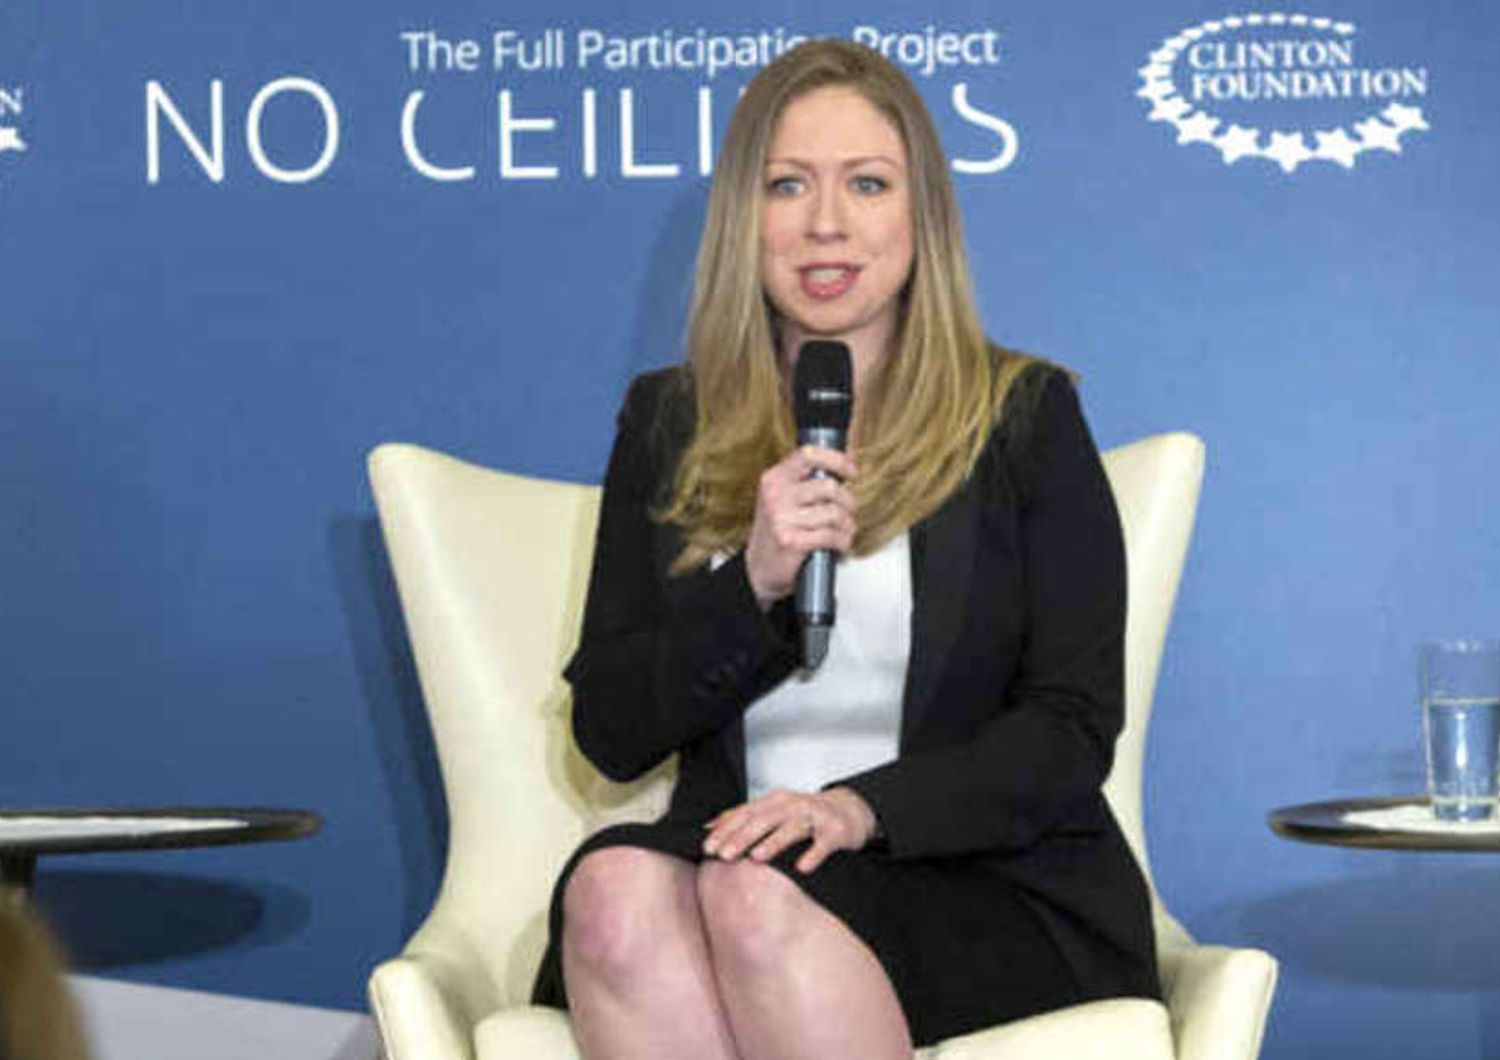 Chelsea Clinton gives birth to a baby girl, Charlotte